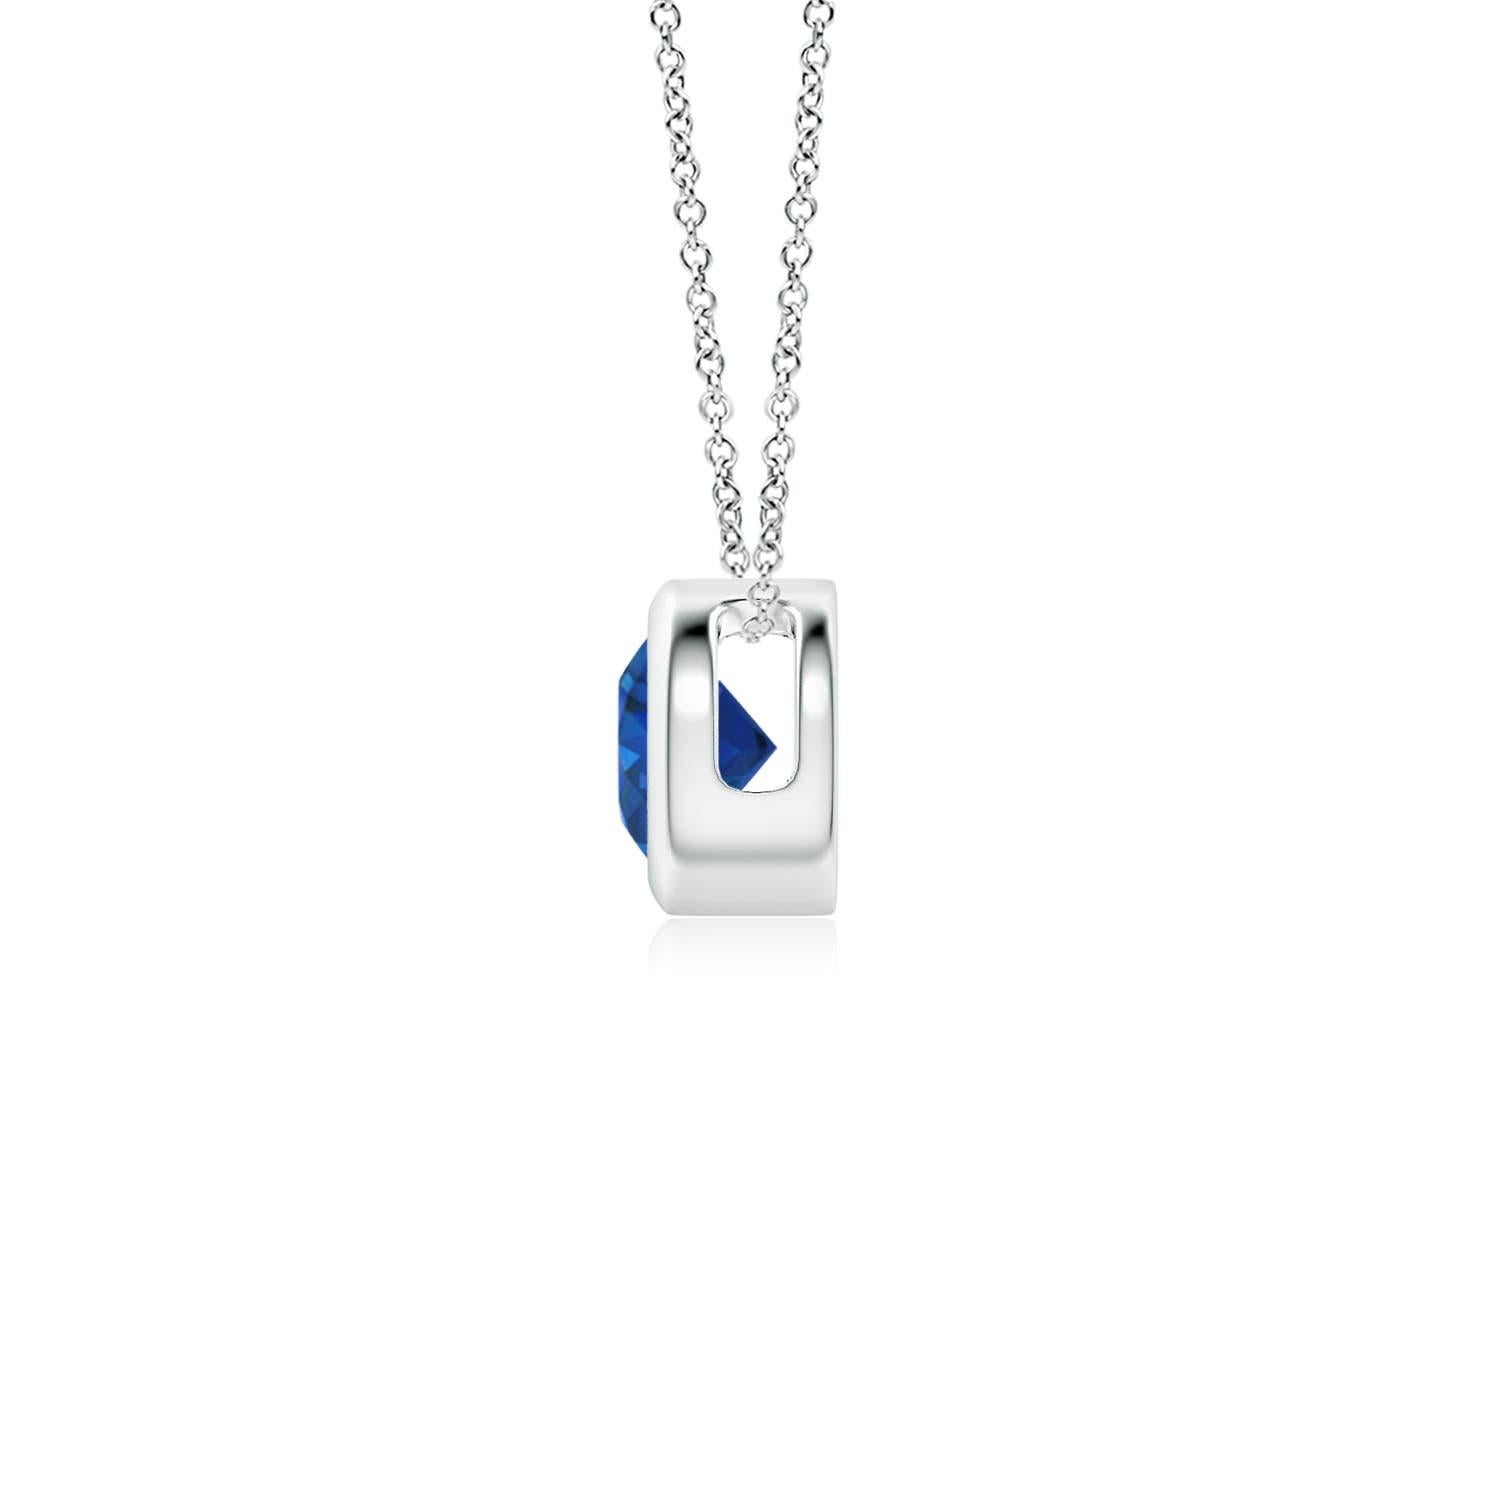 This classic solitaire sapphire pendant's beautiful design makes the center stone appear like it's floating on the chain. The radiant blue gem is secured in a bezel setting. Crafted in 14k white gold, this round sapphire pendant is simple yet